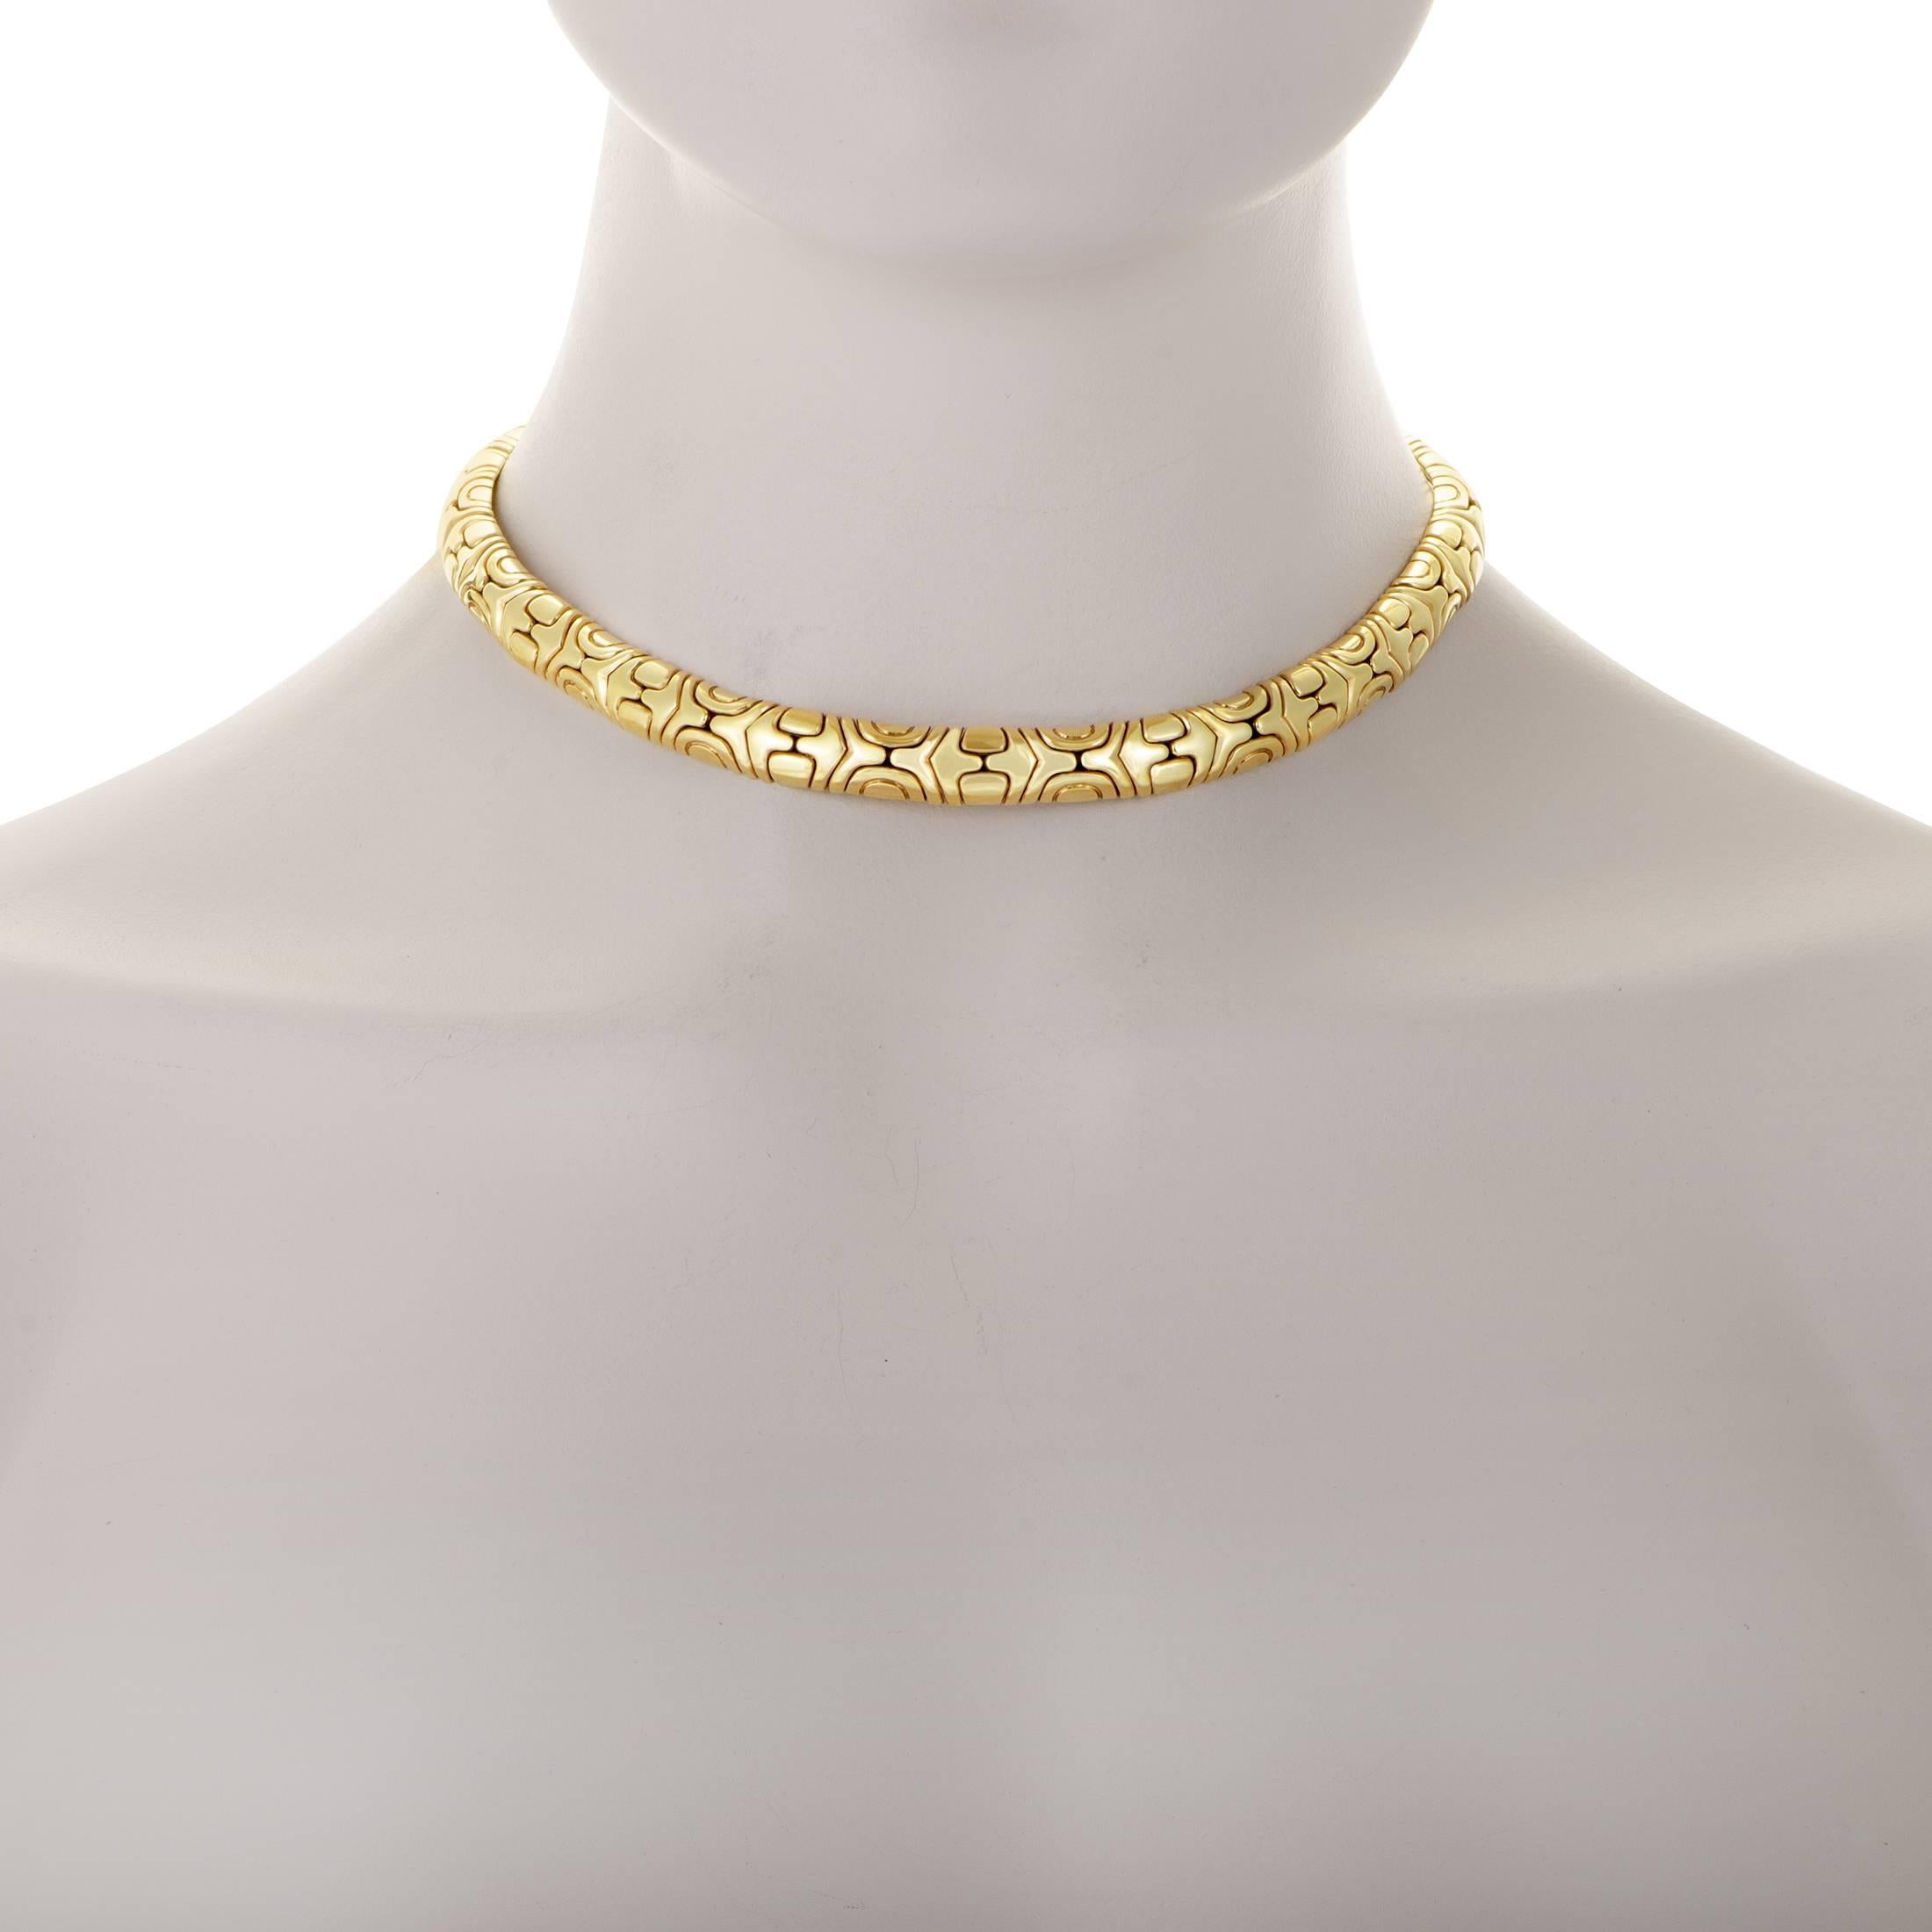 Boasting the brand's instantly recognizable pattern that cuts across the immaculately gleaming surface of radiant 18K yellow gold to produce a marvelous allure, this stunning necklace from Bulgari is an item of immense quality and exceptional